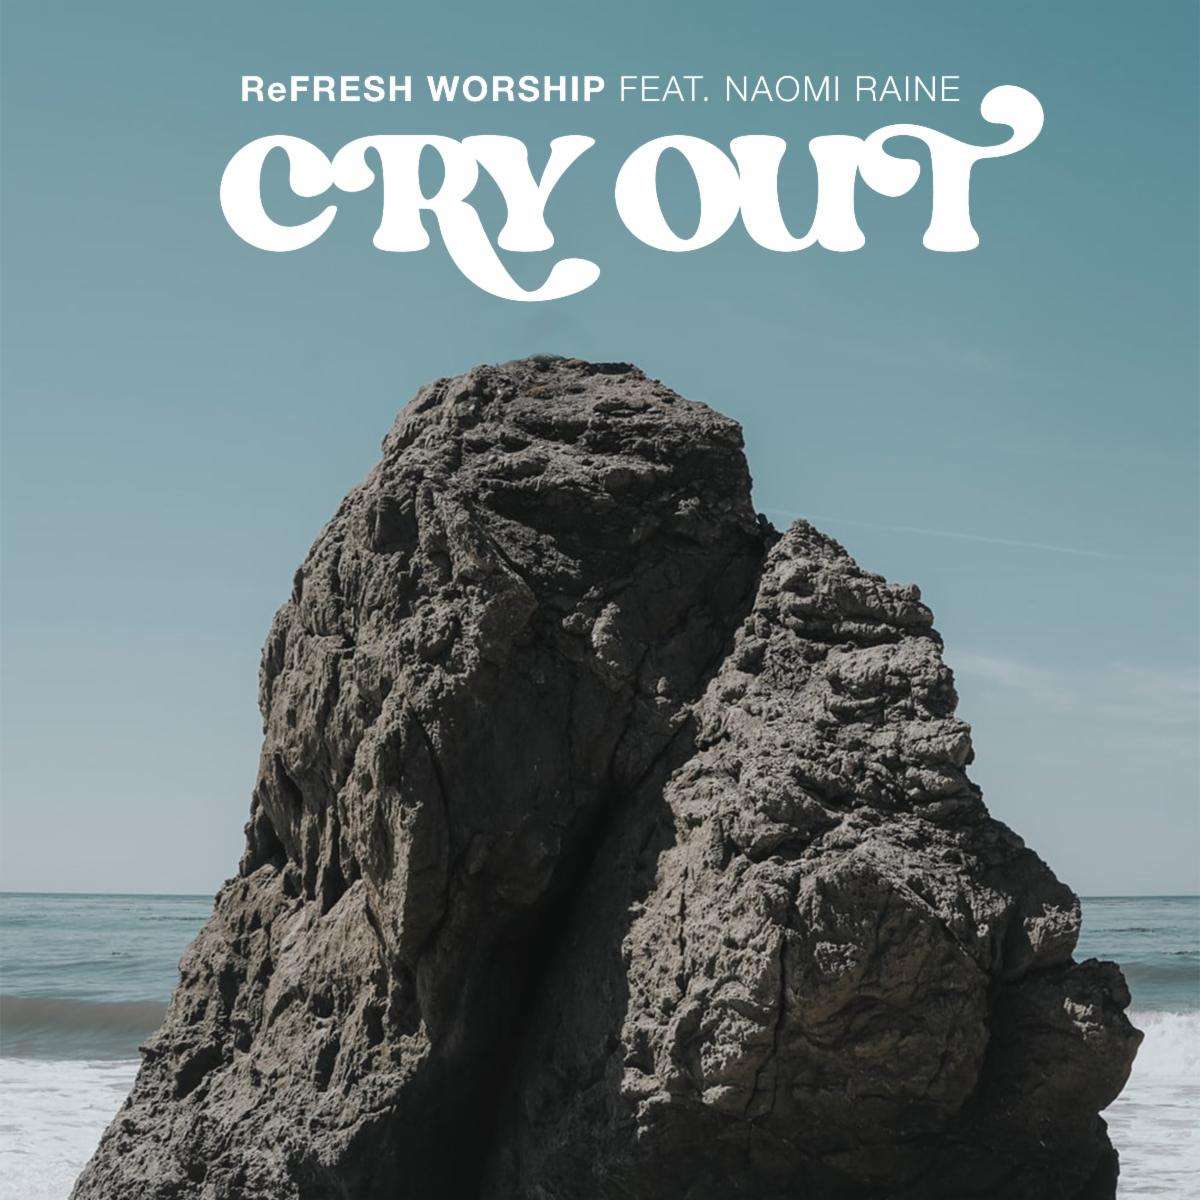 introducing-refresh-worship,-“cry-out”-feat.-naomi-raine